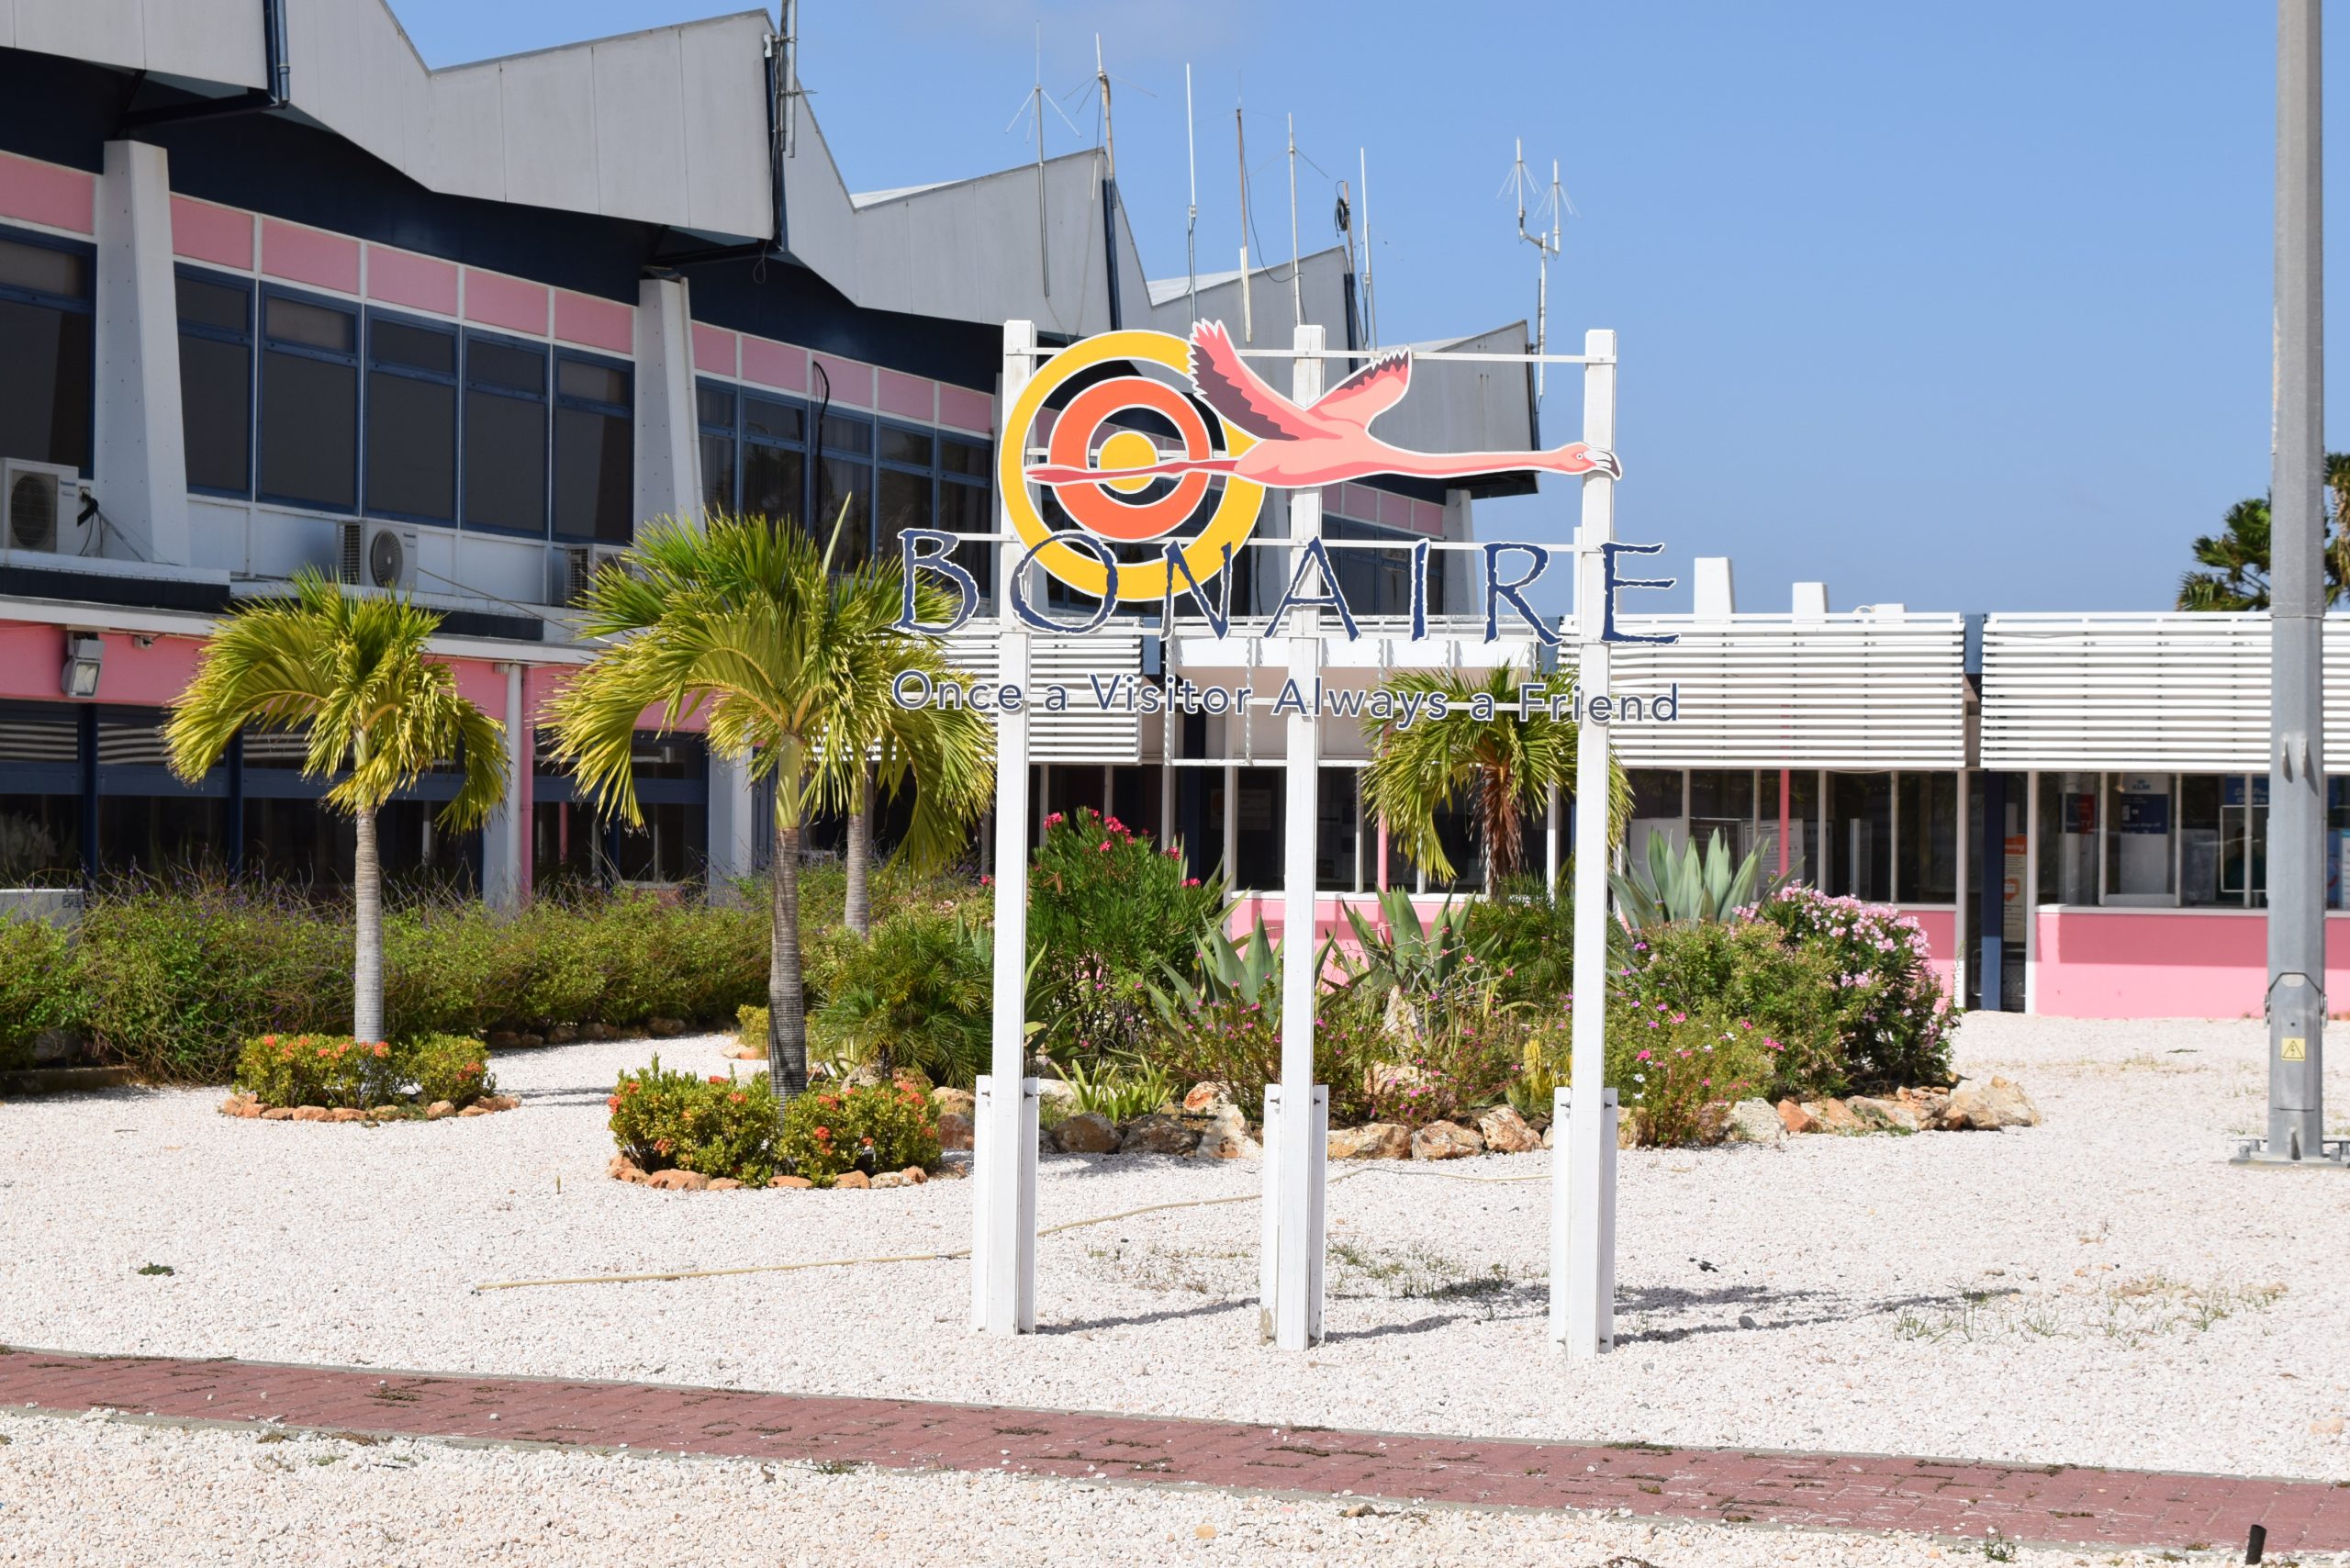 Bonaire implements stricter measures for travelers from The Netherlands and the USA